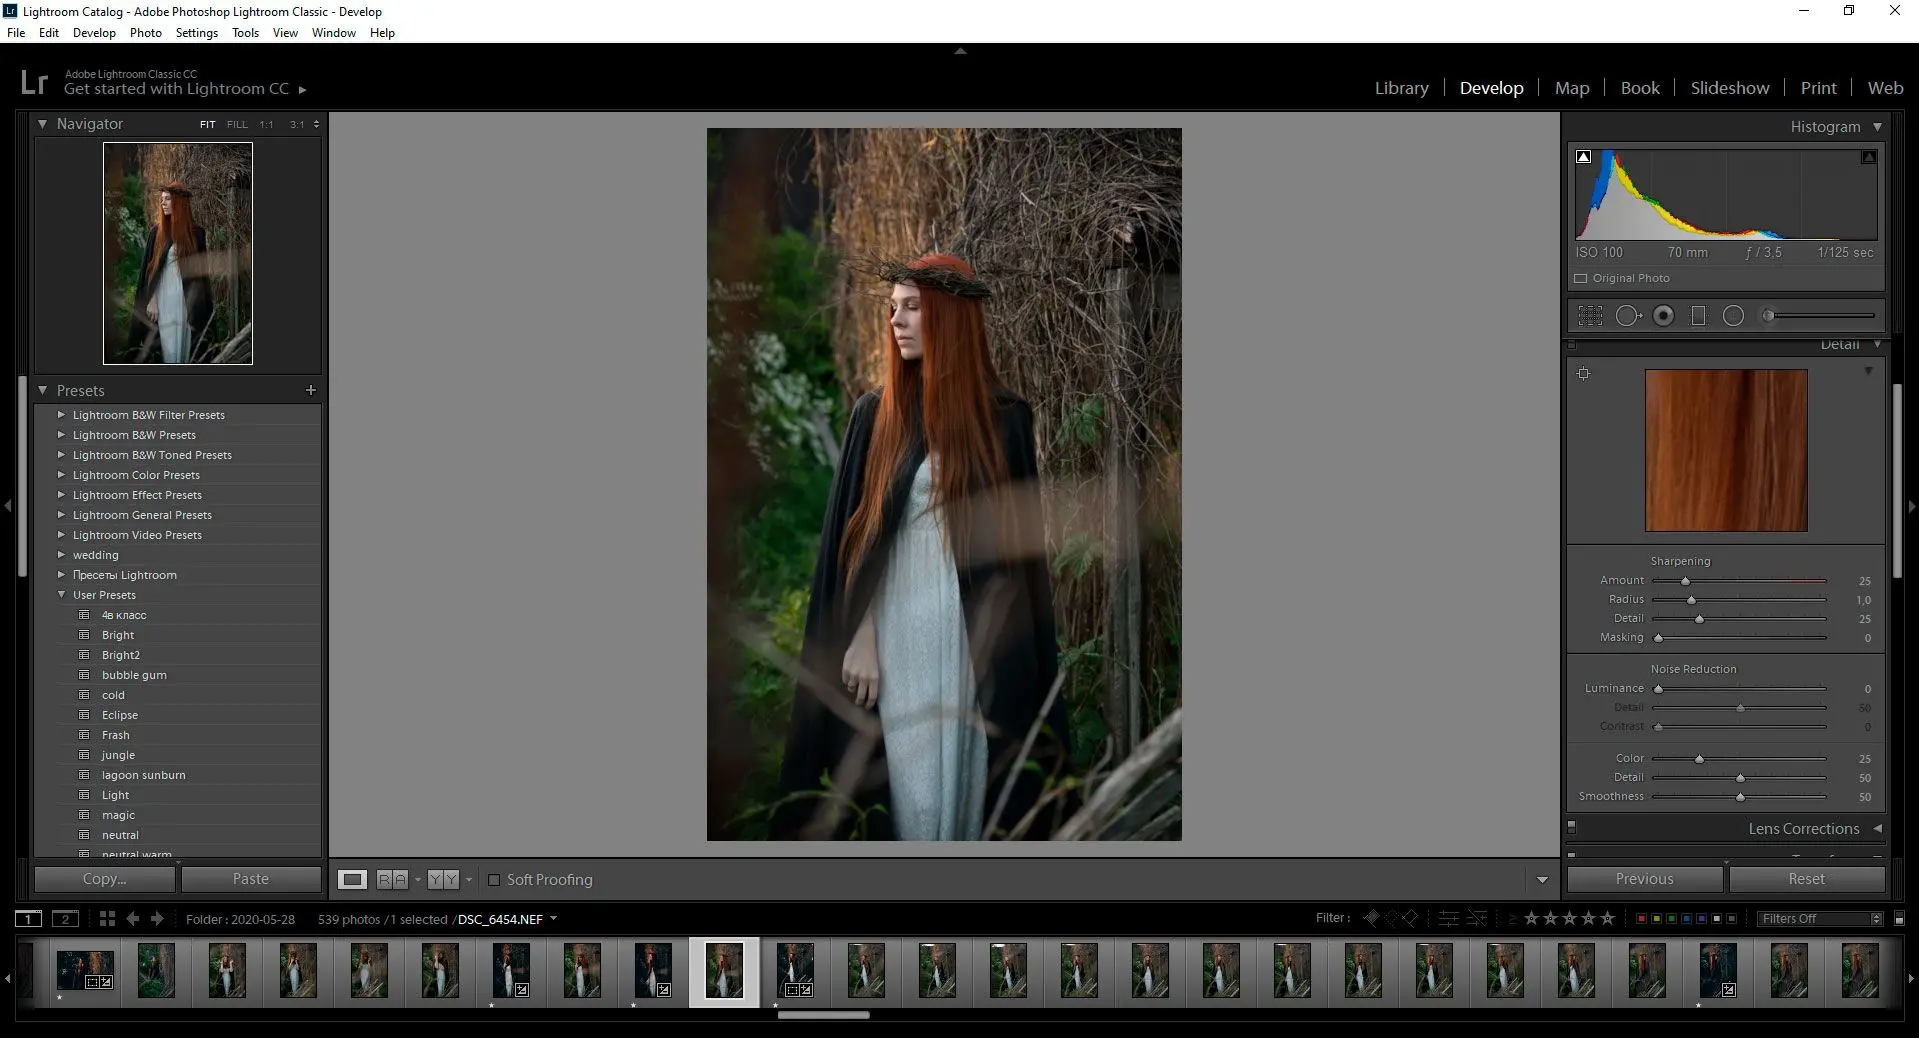 Fix out of focus photos in Lightroom..